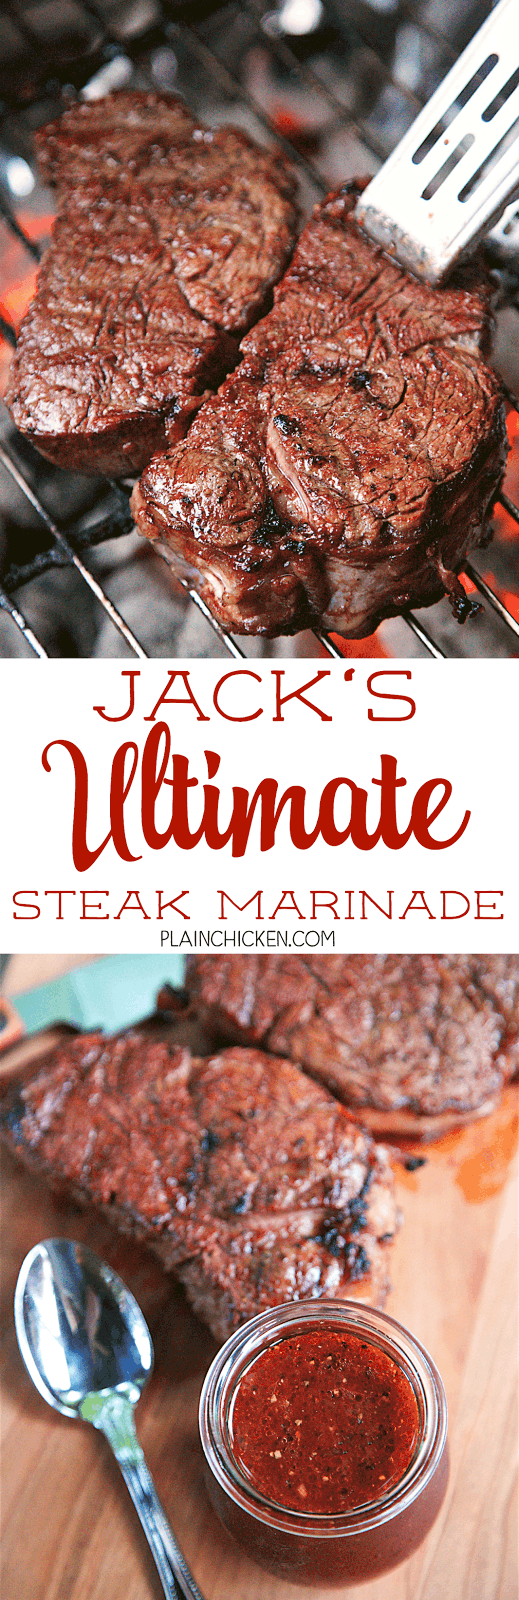 Jack's Ultimate Steak Marinade - steaks marinated in red wine, chili sauce, red wine vinegar, Worcestershire sauce, onion, garlic, salt, pepper and a bay leaf. This marinade is seriously delicious! Our new go-to marinade. TONS of great flavor!!